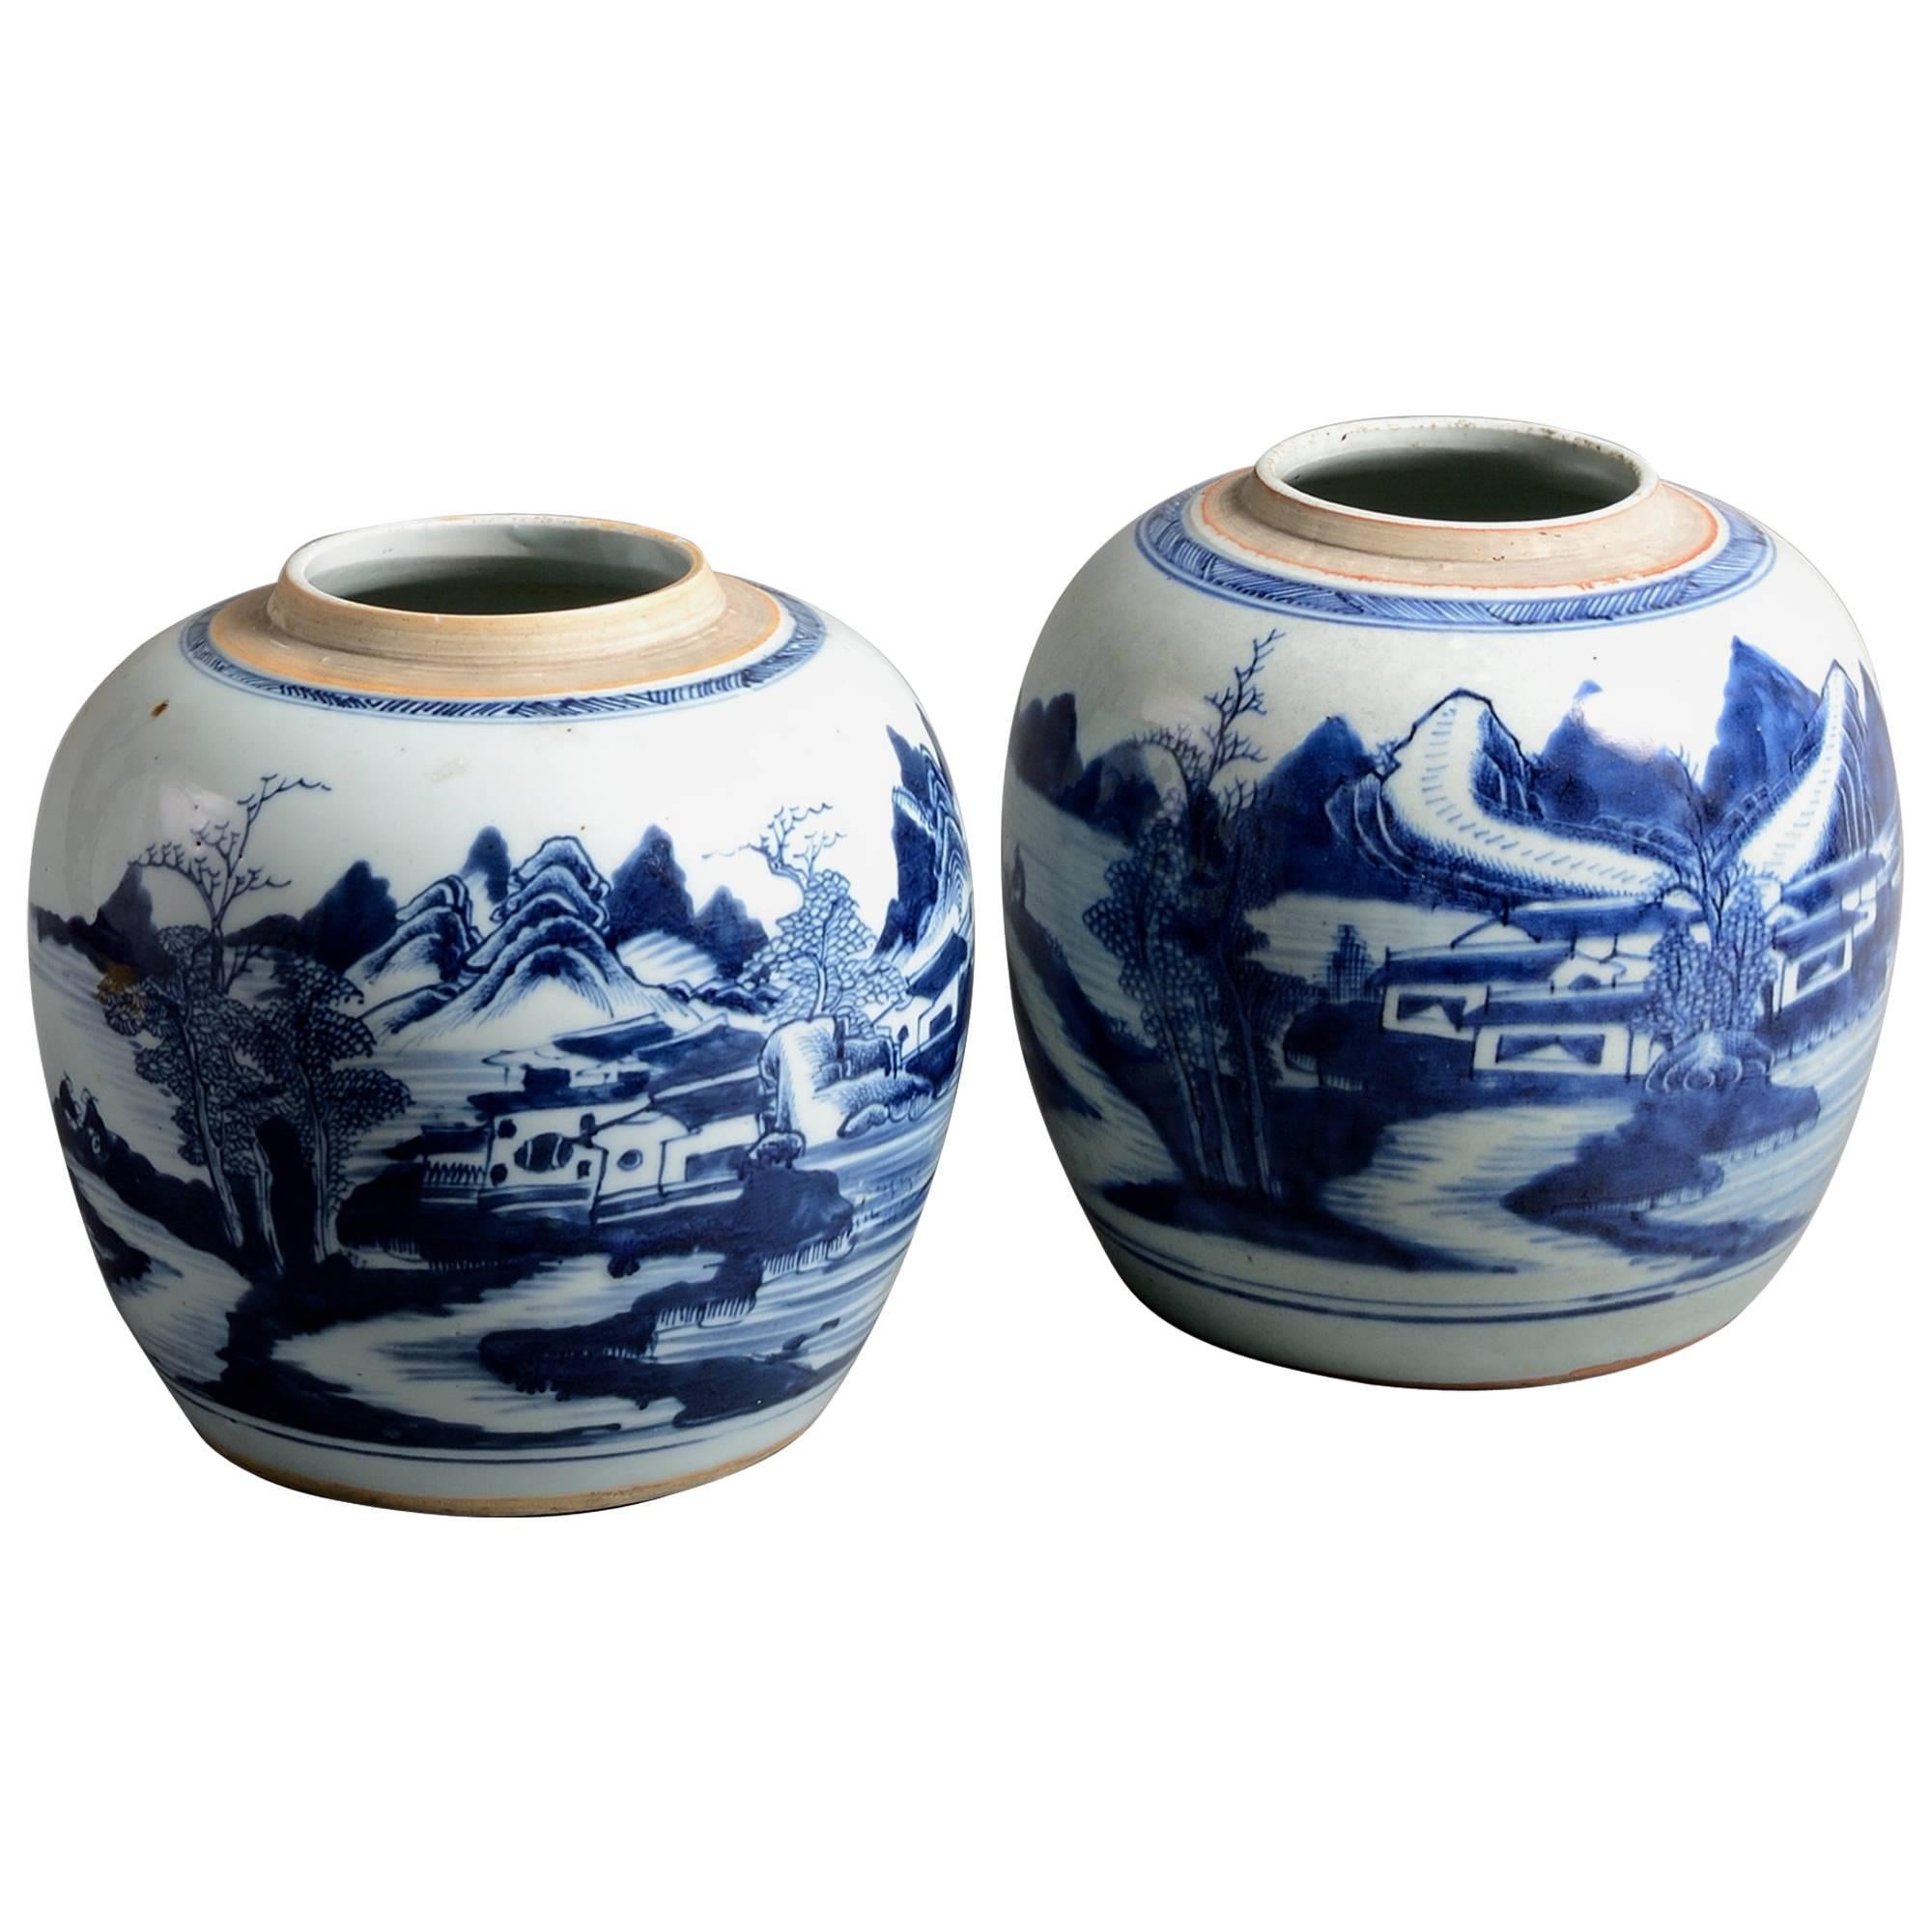 Pair of Late 18th Century Blue and White Porcelain Jars